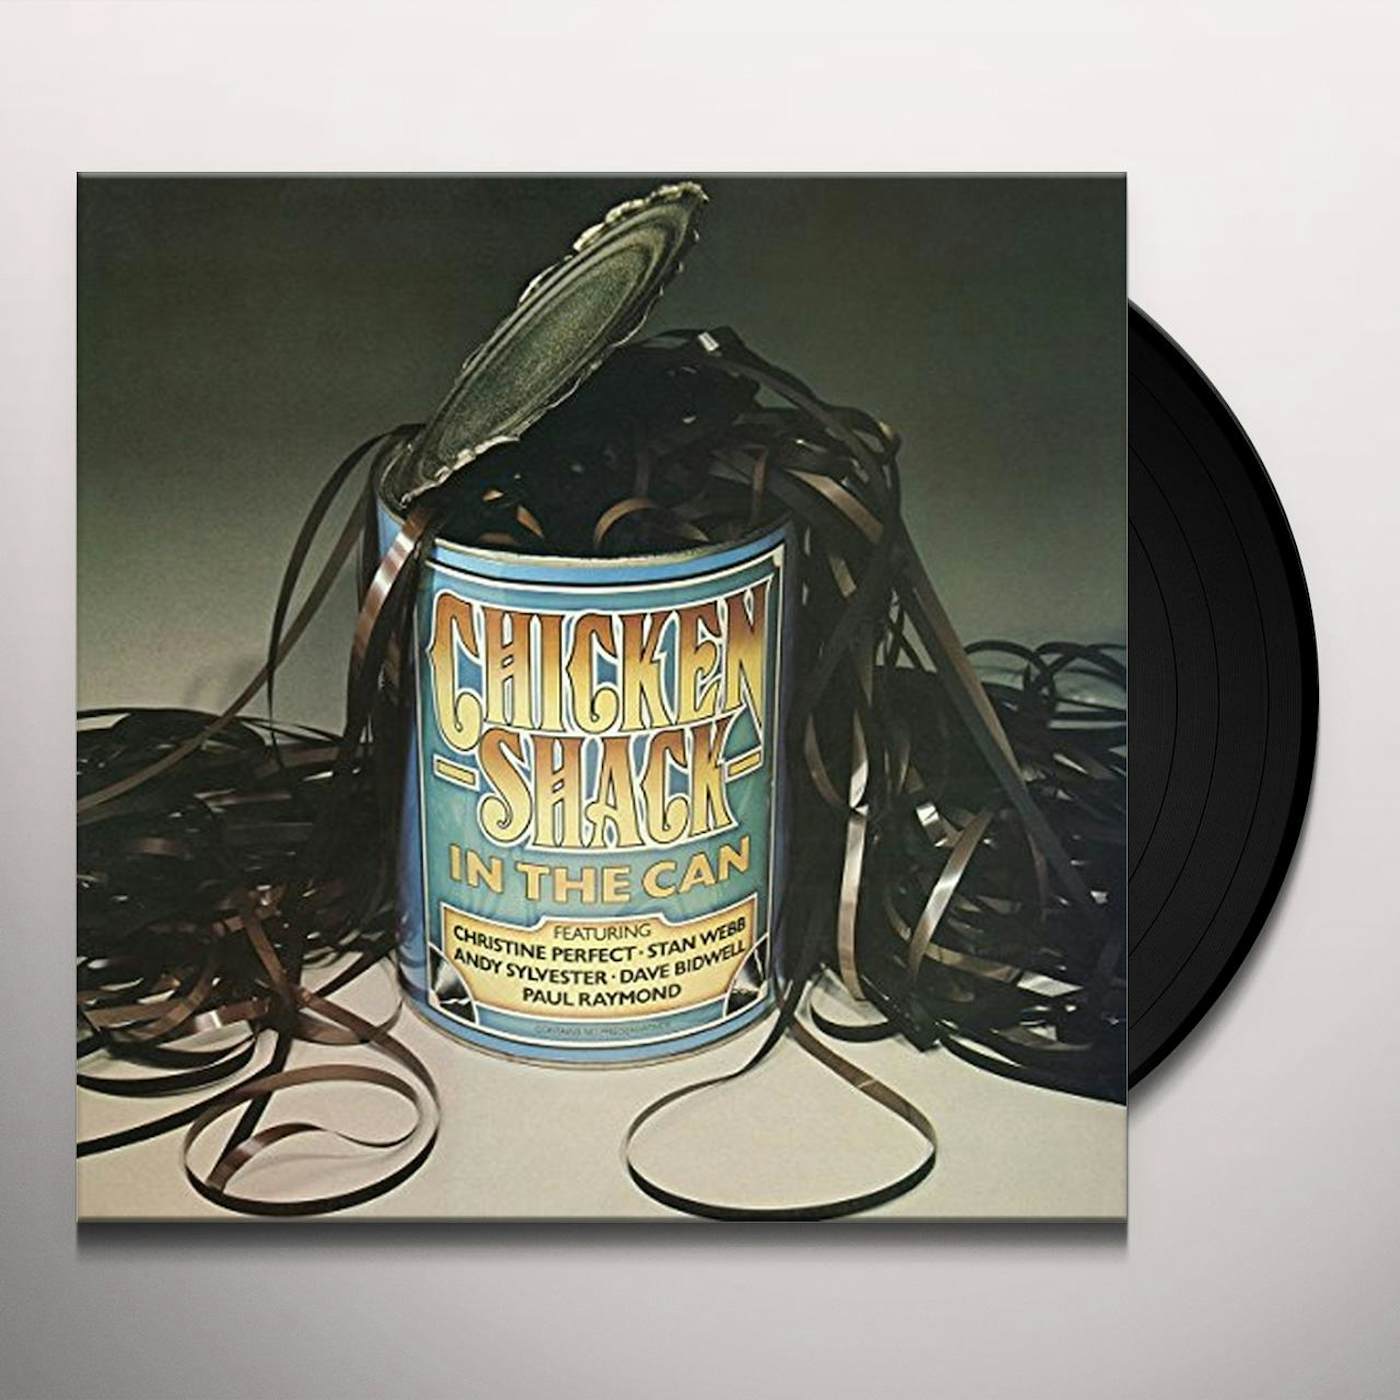 Chicken Shack In The Can Vinyl Record